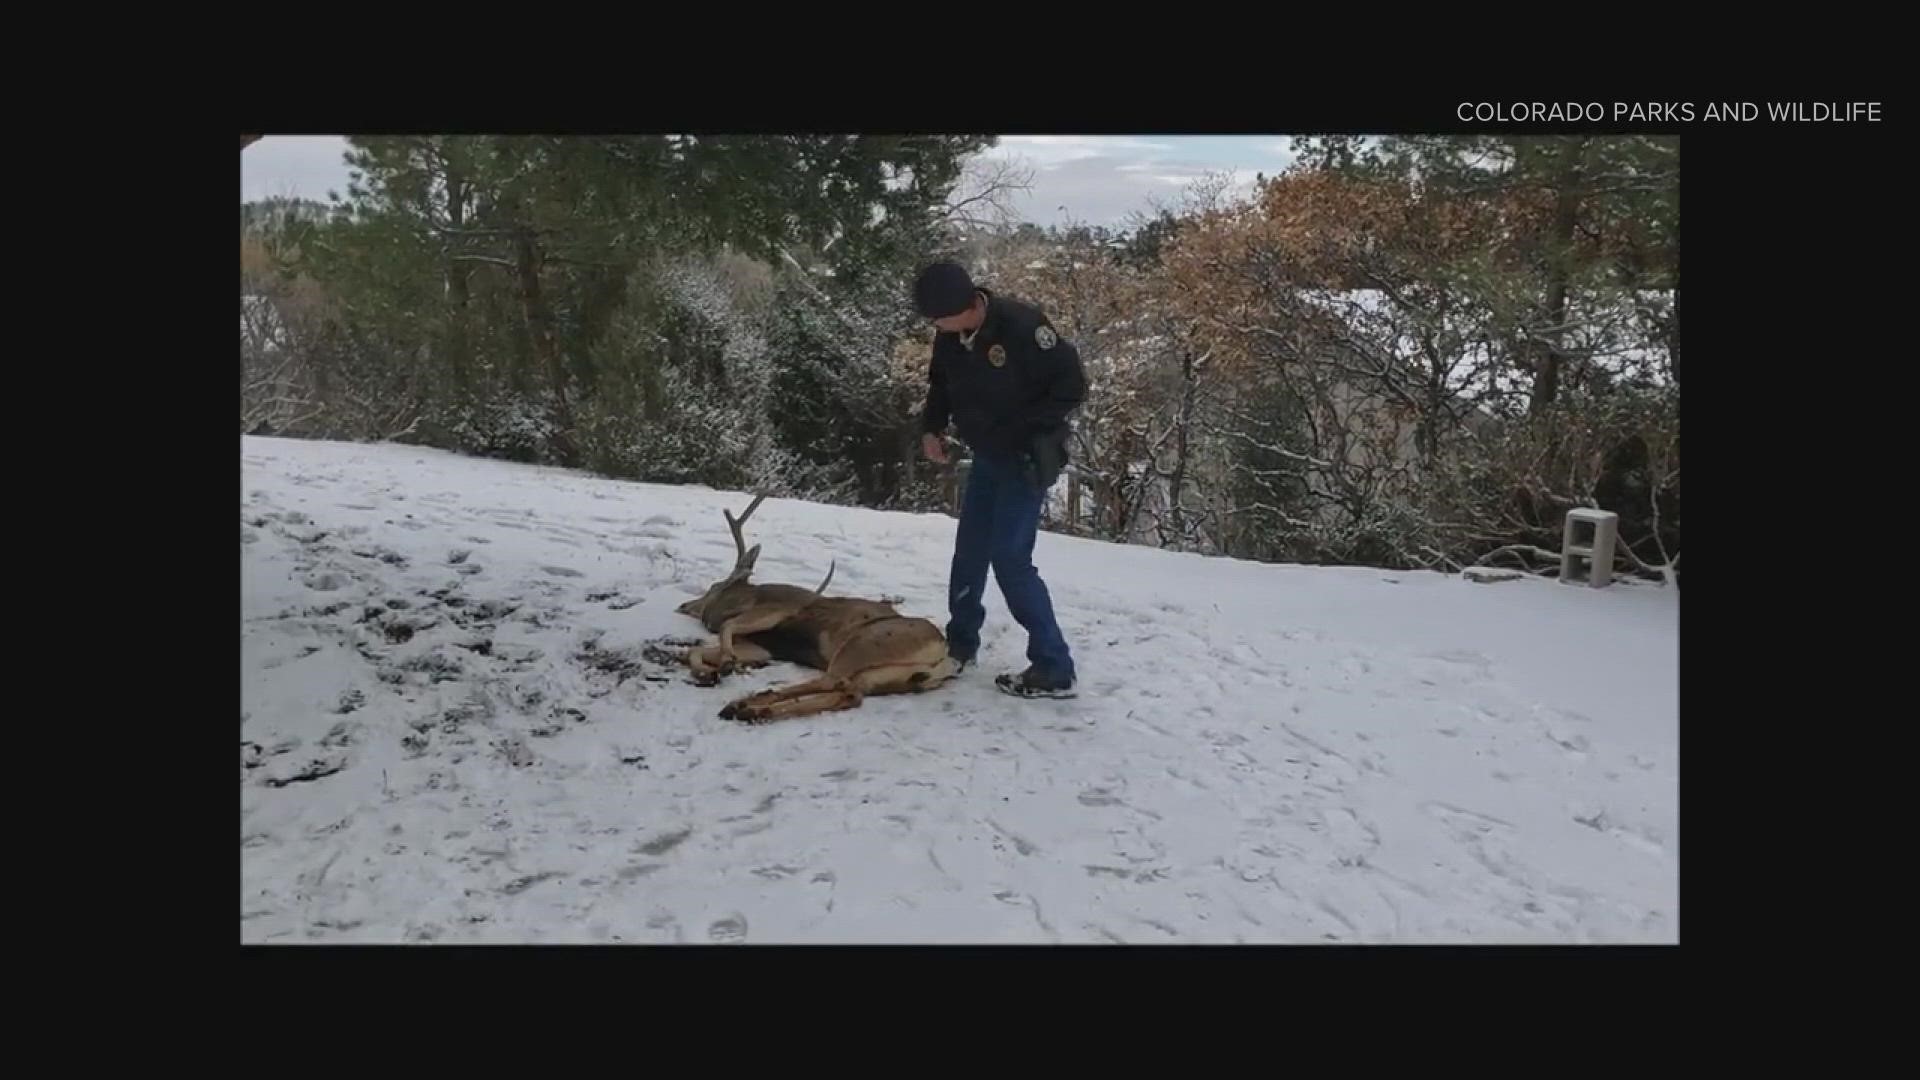 The Colorado Parks and Wildlife video shows an officer massaging the buck's chest to stimulate it until drugs took effect reversing a tranquilizer.